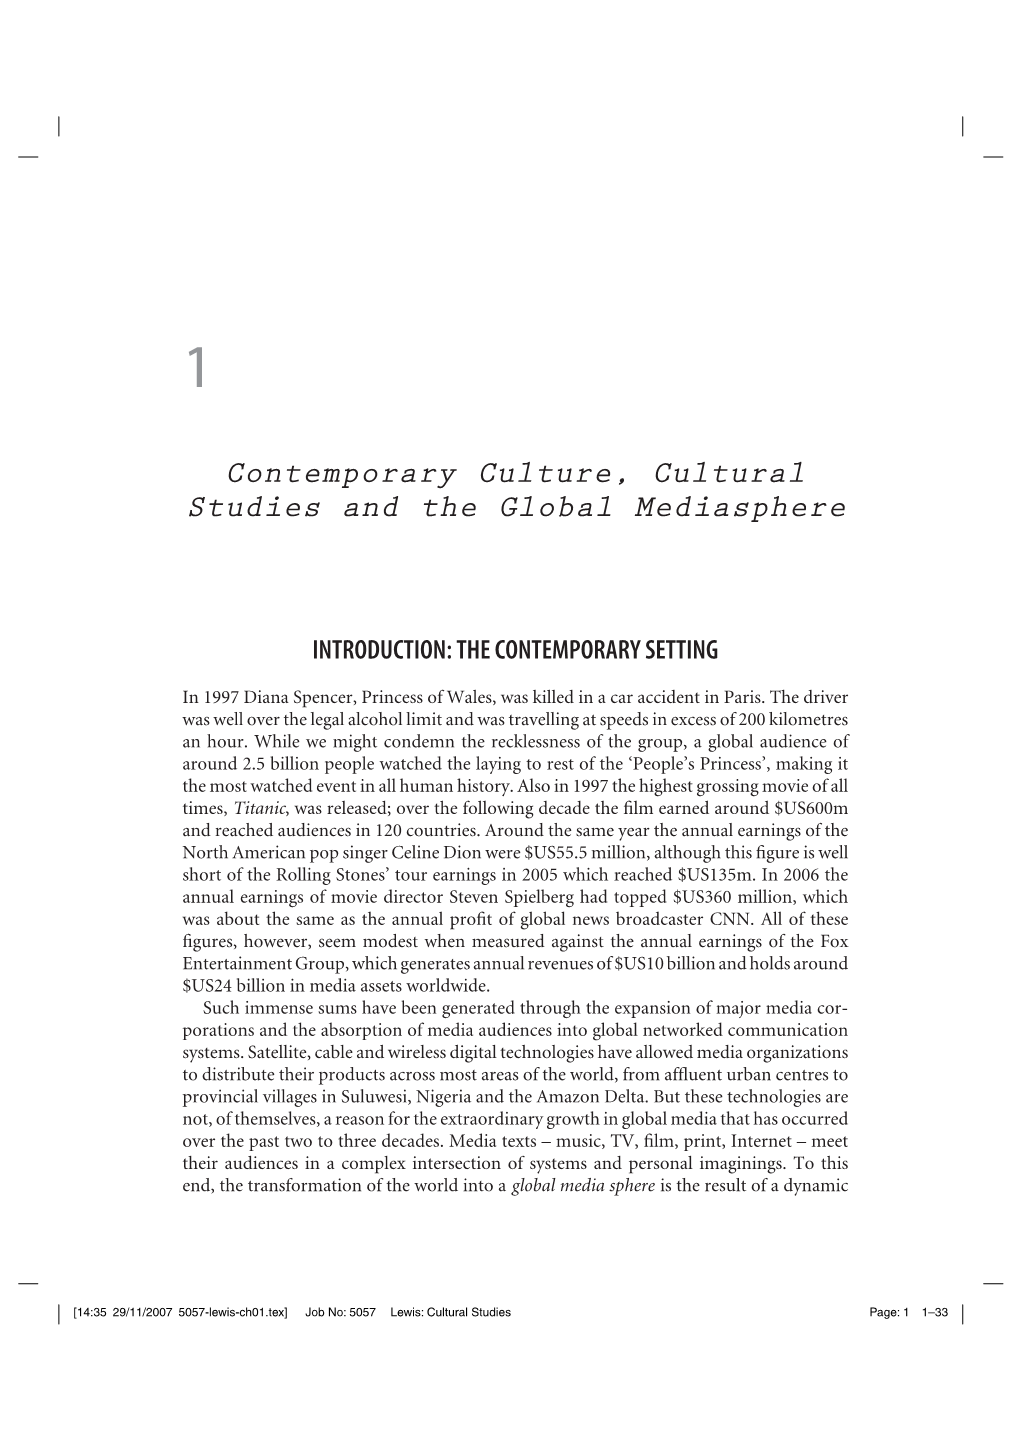 Contemporary Culture, Cultural Studies and the Global Mediasphere